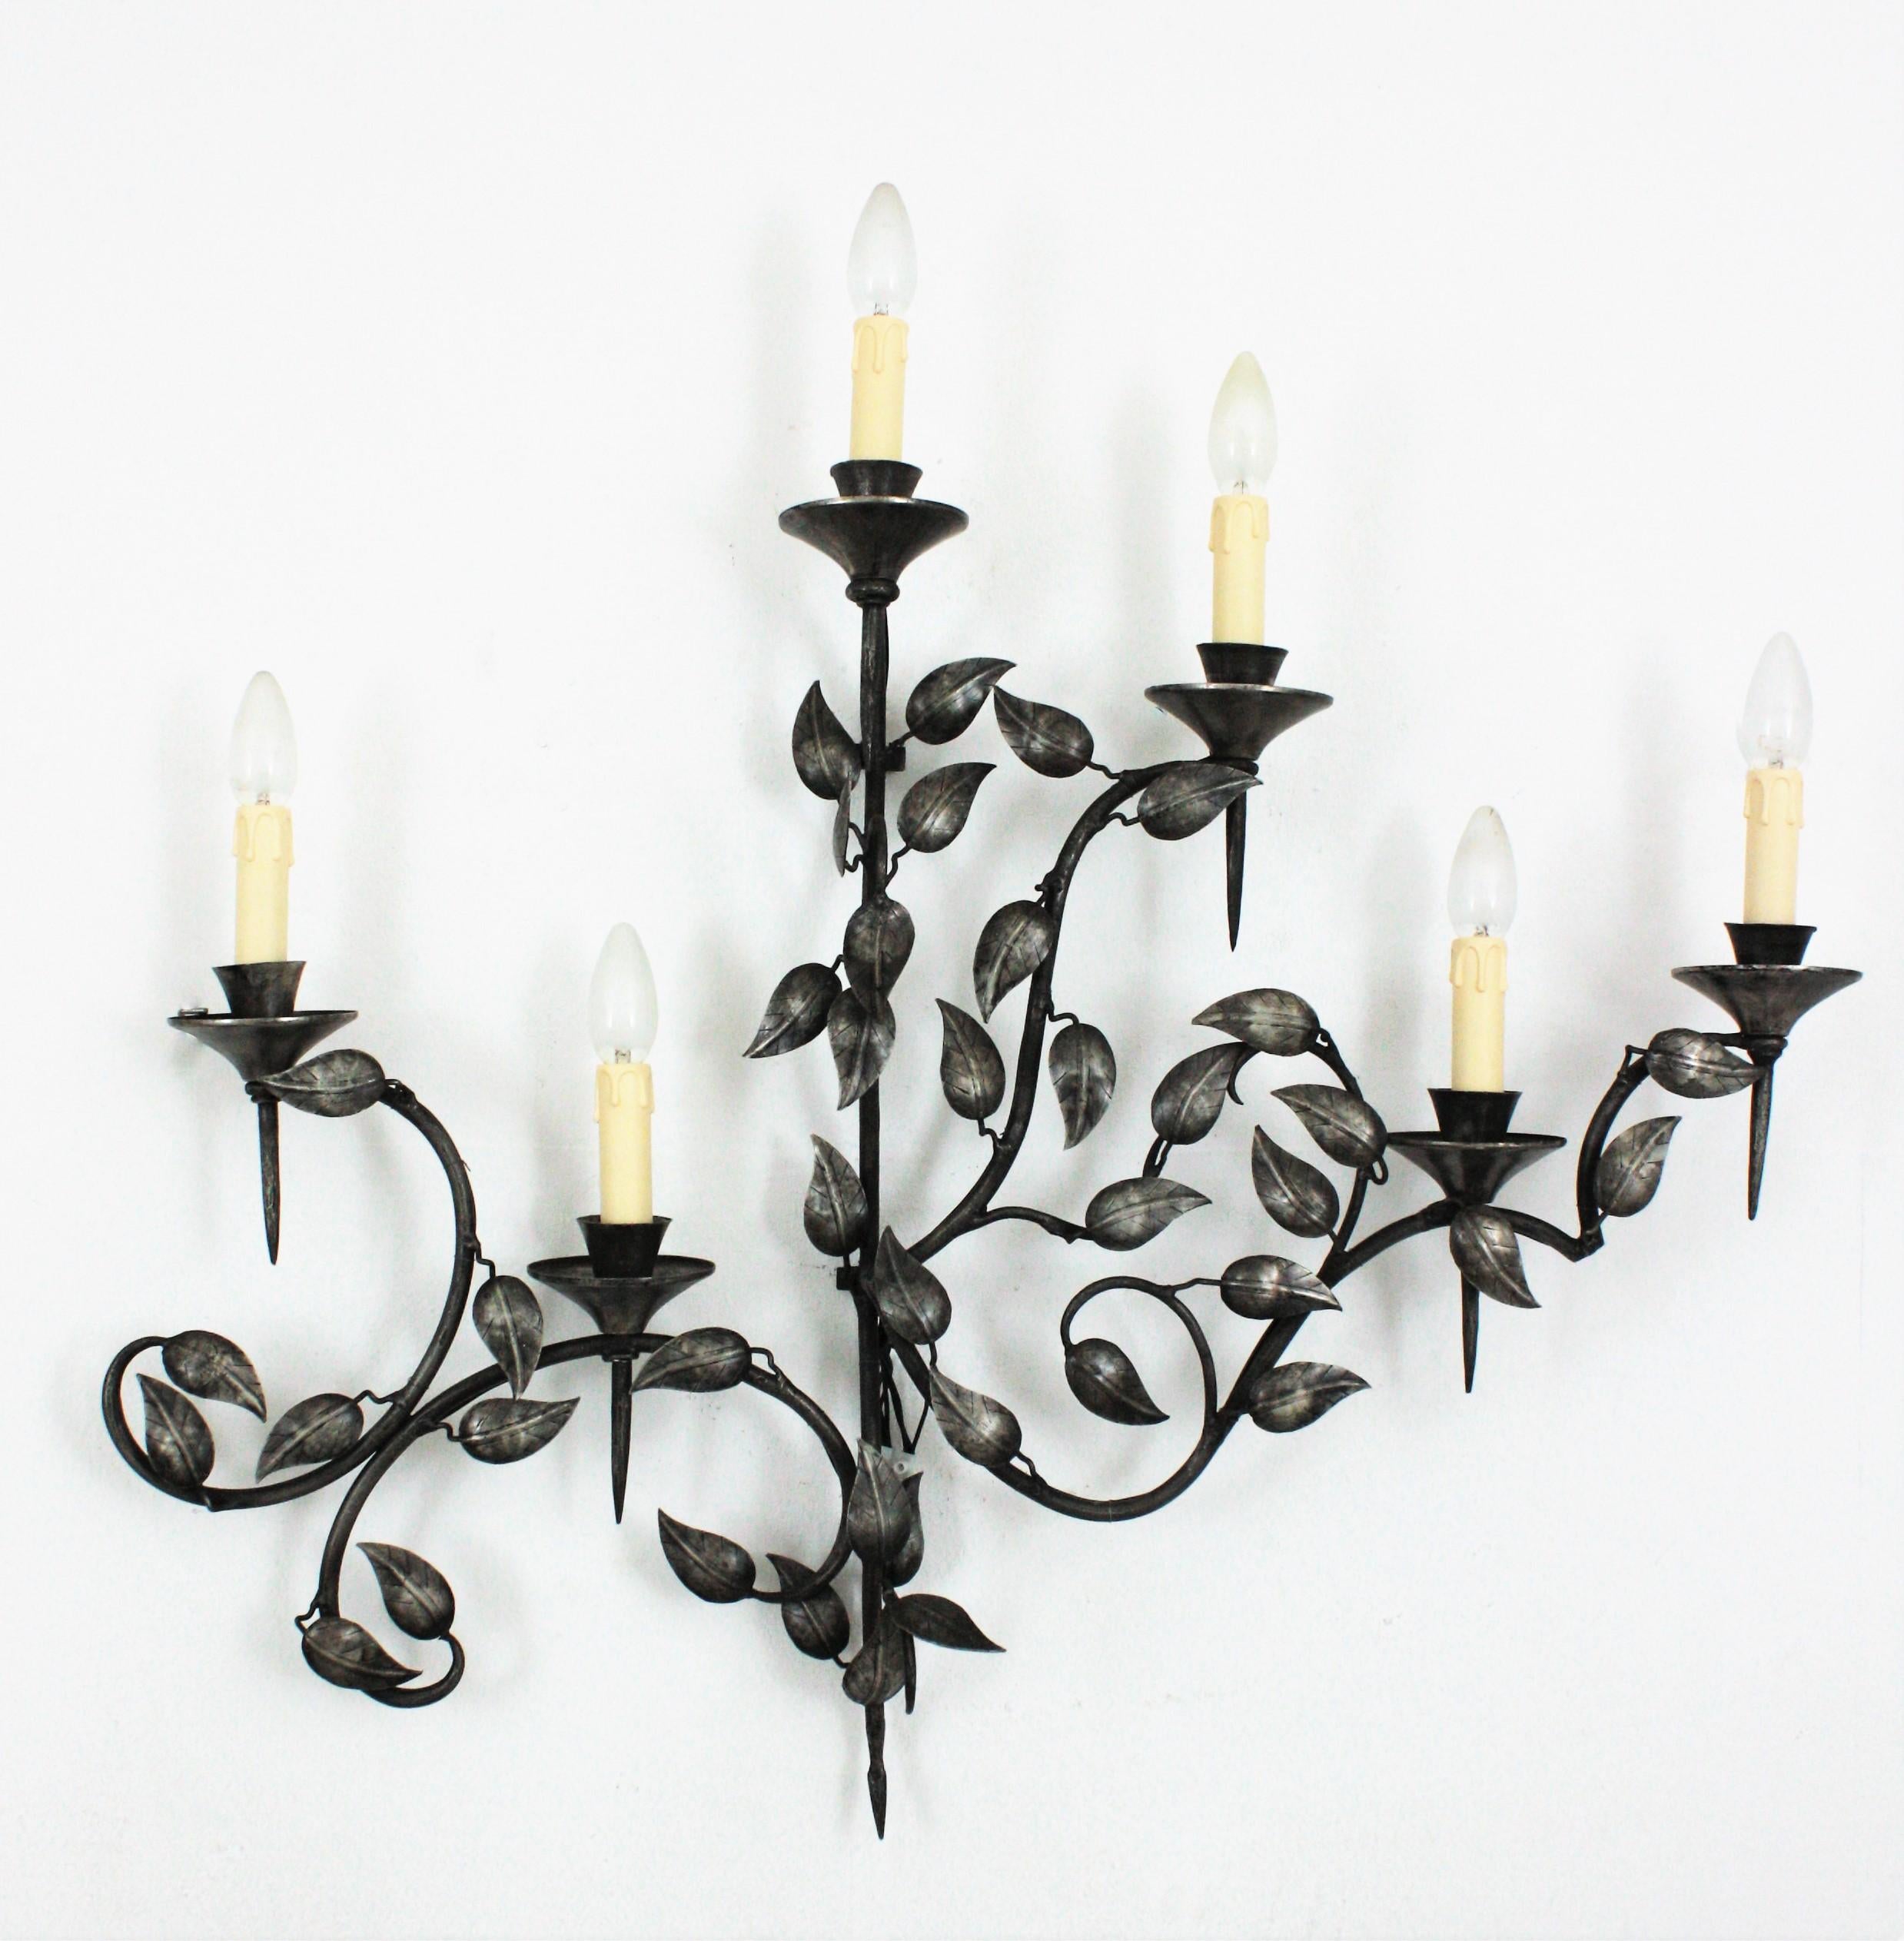 Leaves wall sconce with 6 torch shaped lights patinated in silver and foliage design. Spain, 1950s.
This outstanding wall light features an intrincate of leaves with branches holding 6 torch shaped bulb candle shaped holders.
Silver leaf and